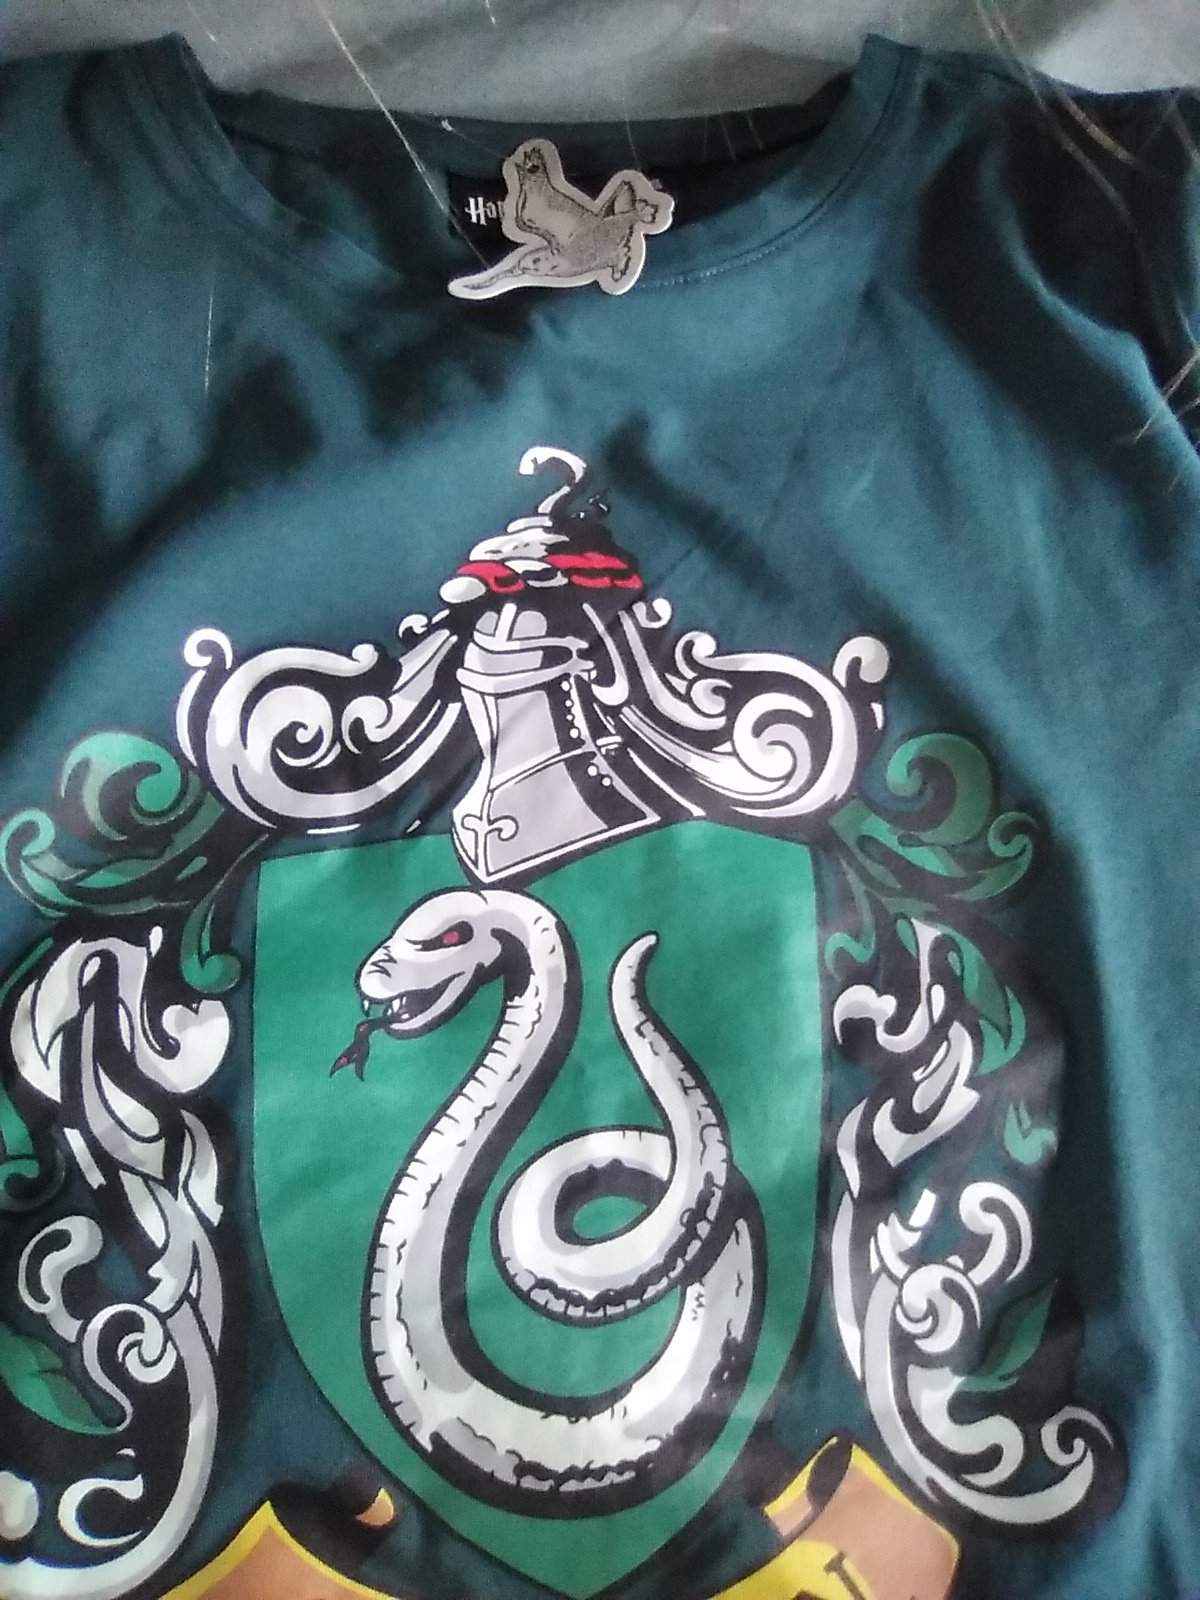 I finally got something from Harry Potter and its a slitherin shirt 💚💚💚 ...